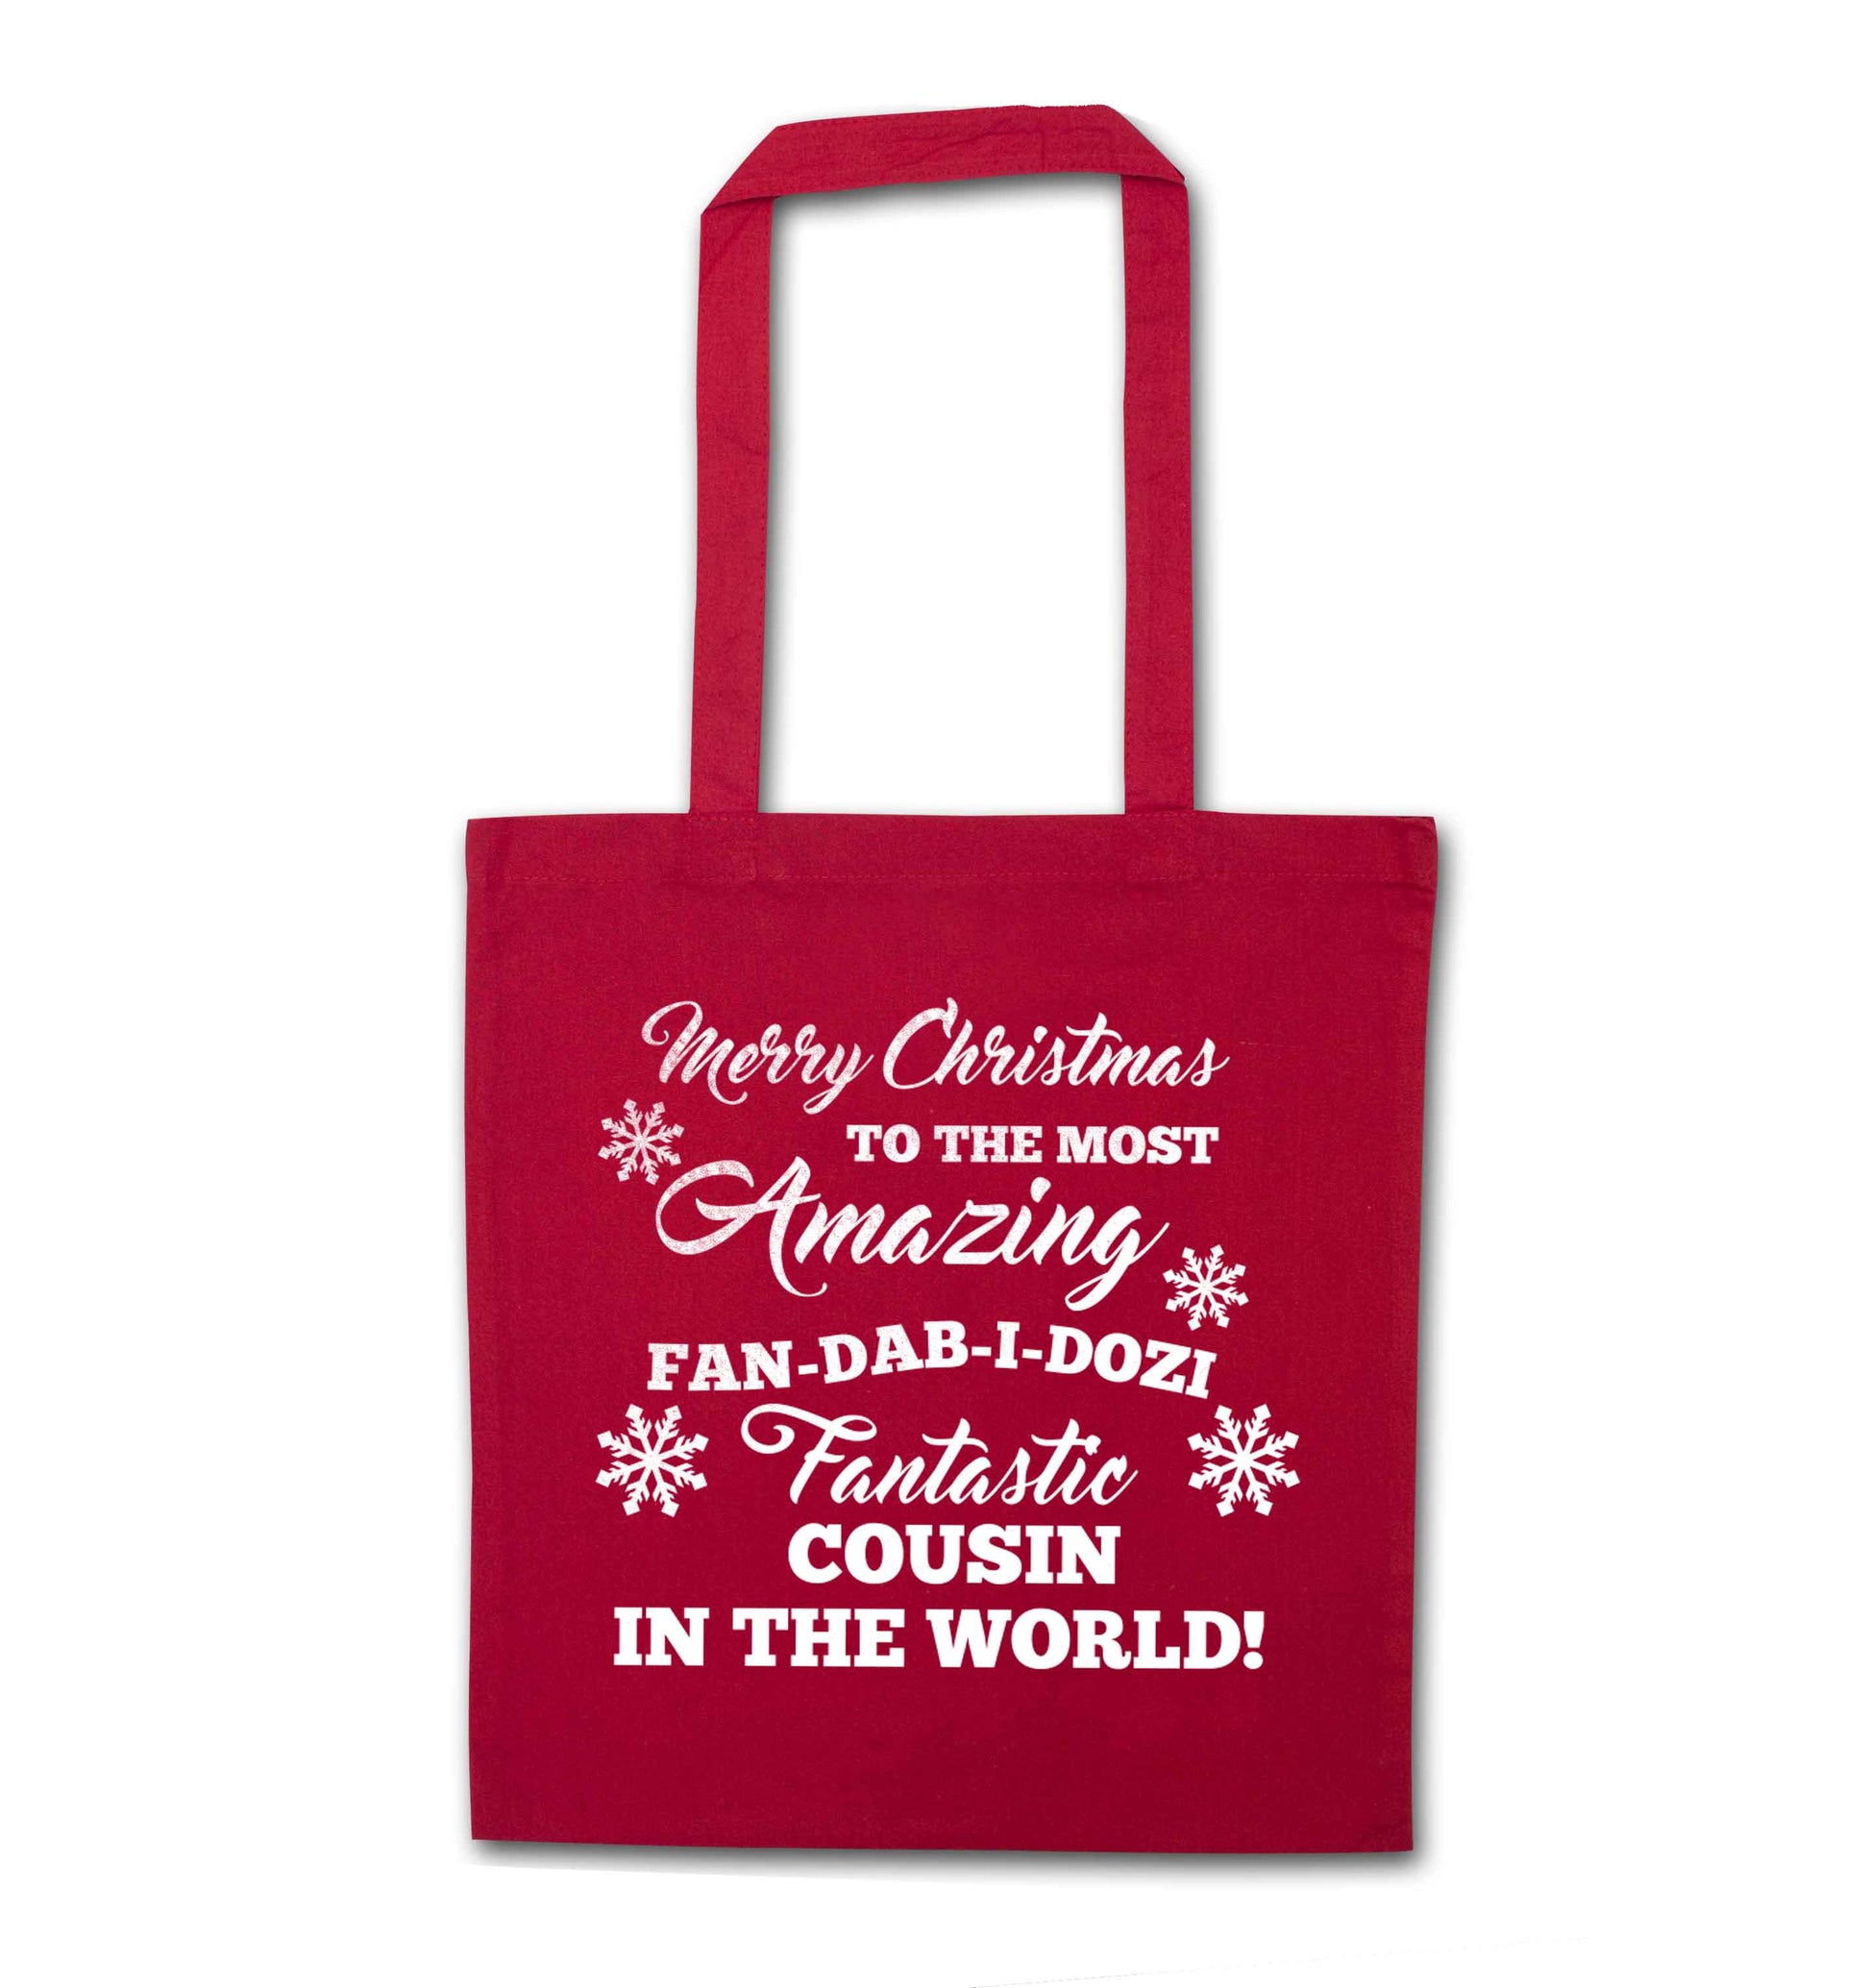 Merry Christmas to the most amazing fan-dab-i-dozi fantasic Cousin in the world red tote bag